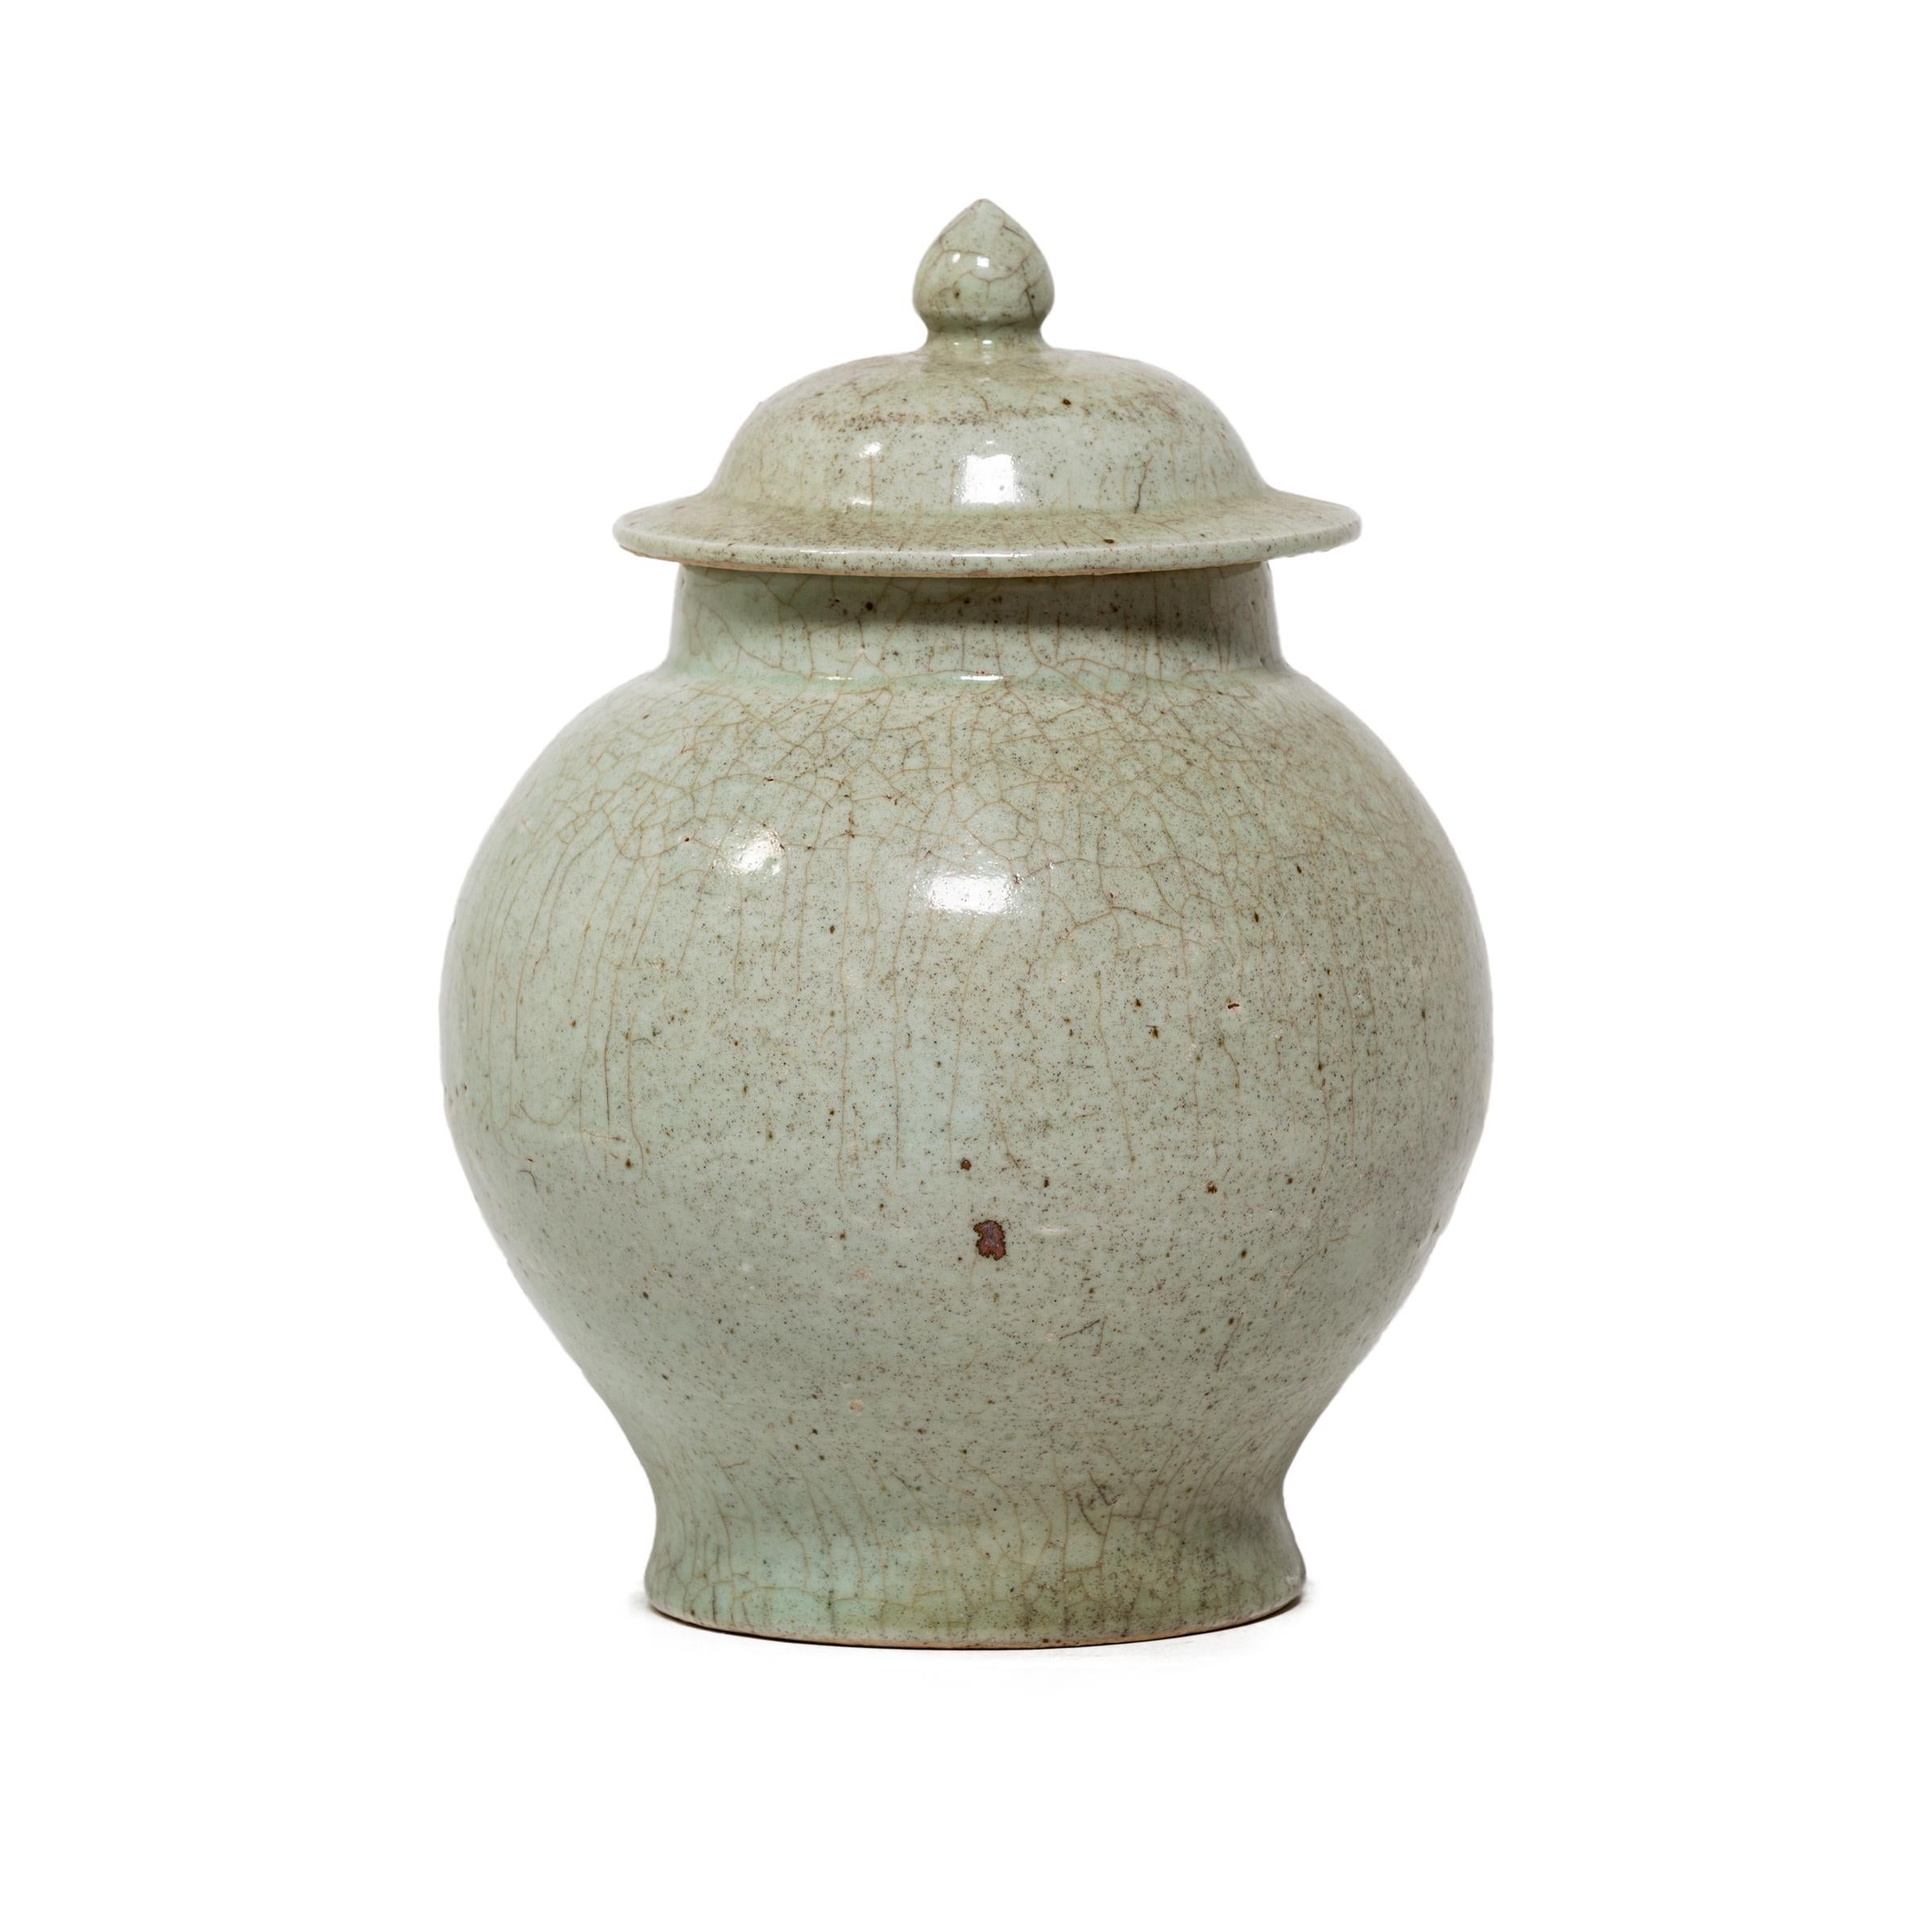 This round lidded vessel has a simple baluster jar form and a subdued celadon glaze finished with a richly crazed texture. Master ceramic artists in Zhejiang beautifully recreate the distinctive crackle glaze of traditional Guan and Ge ware,